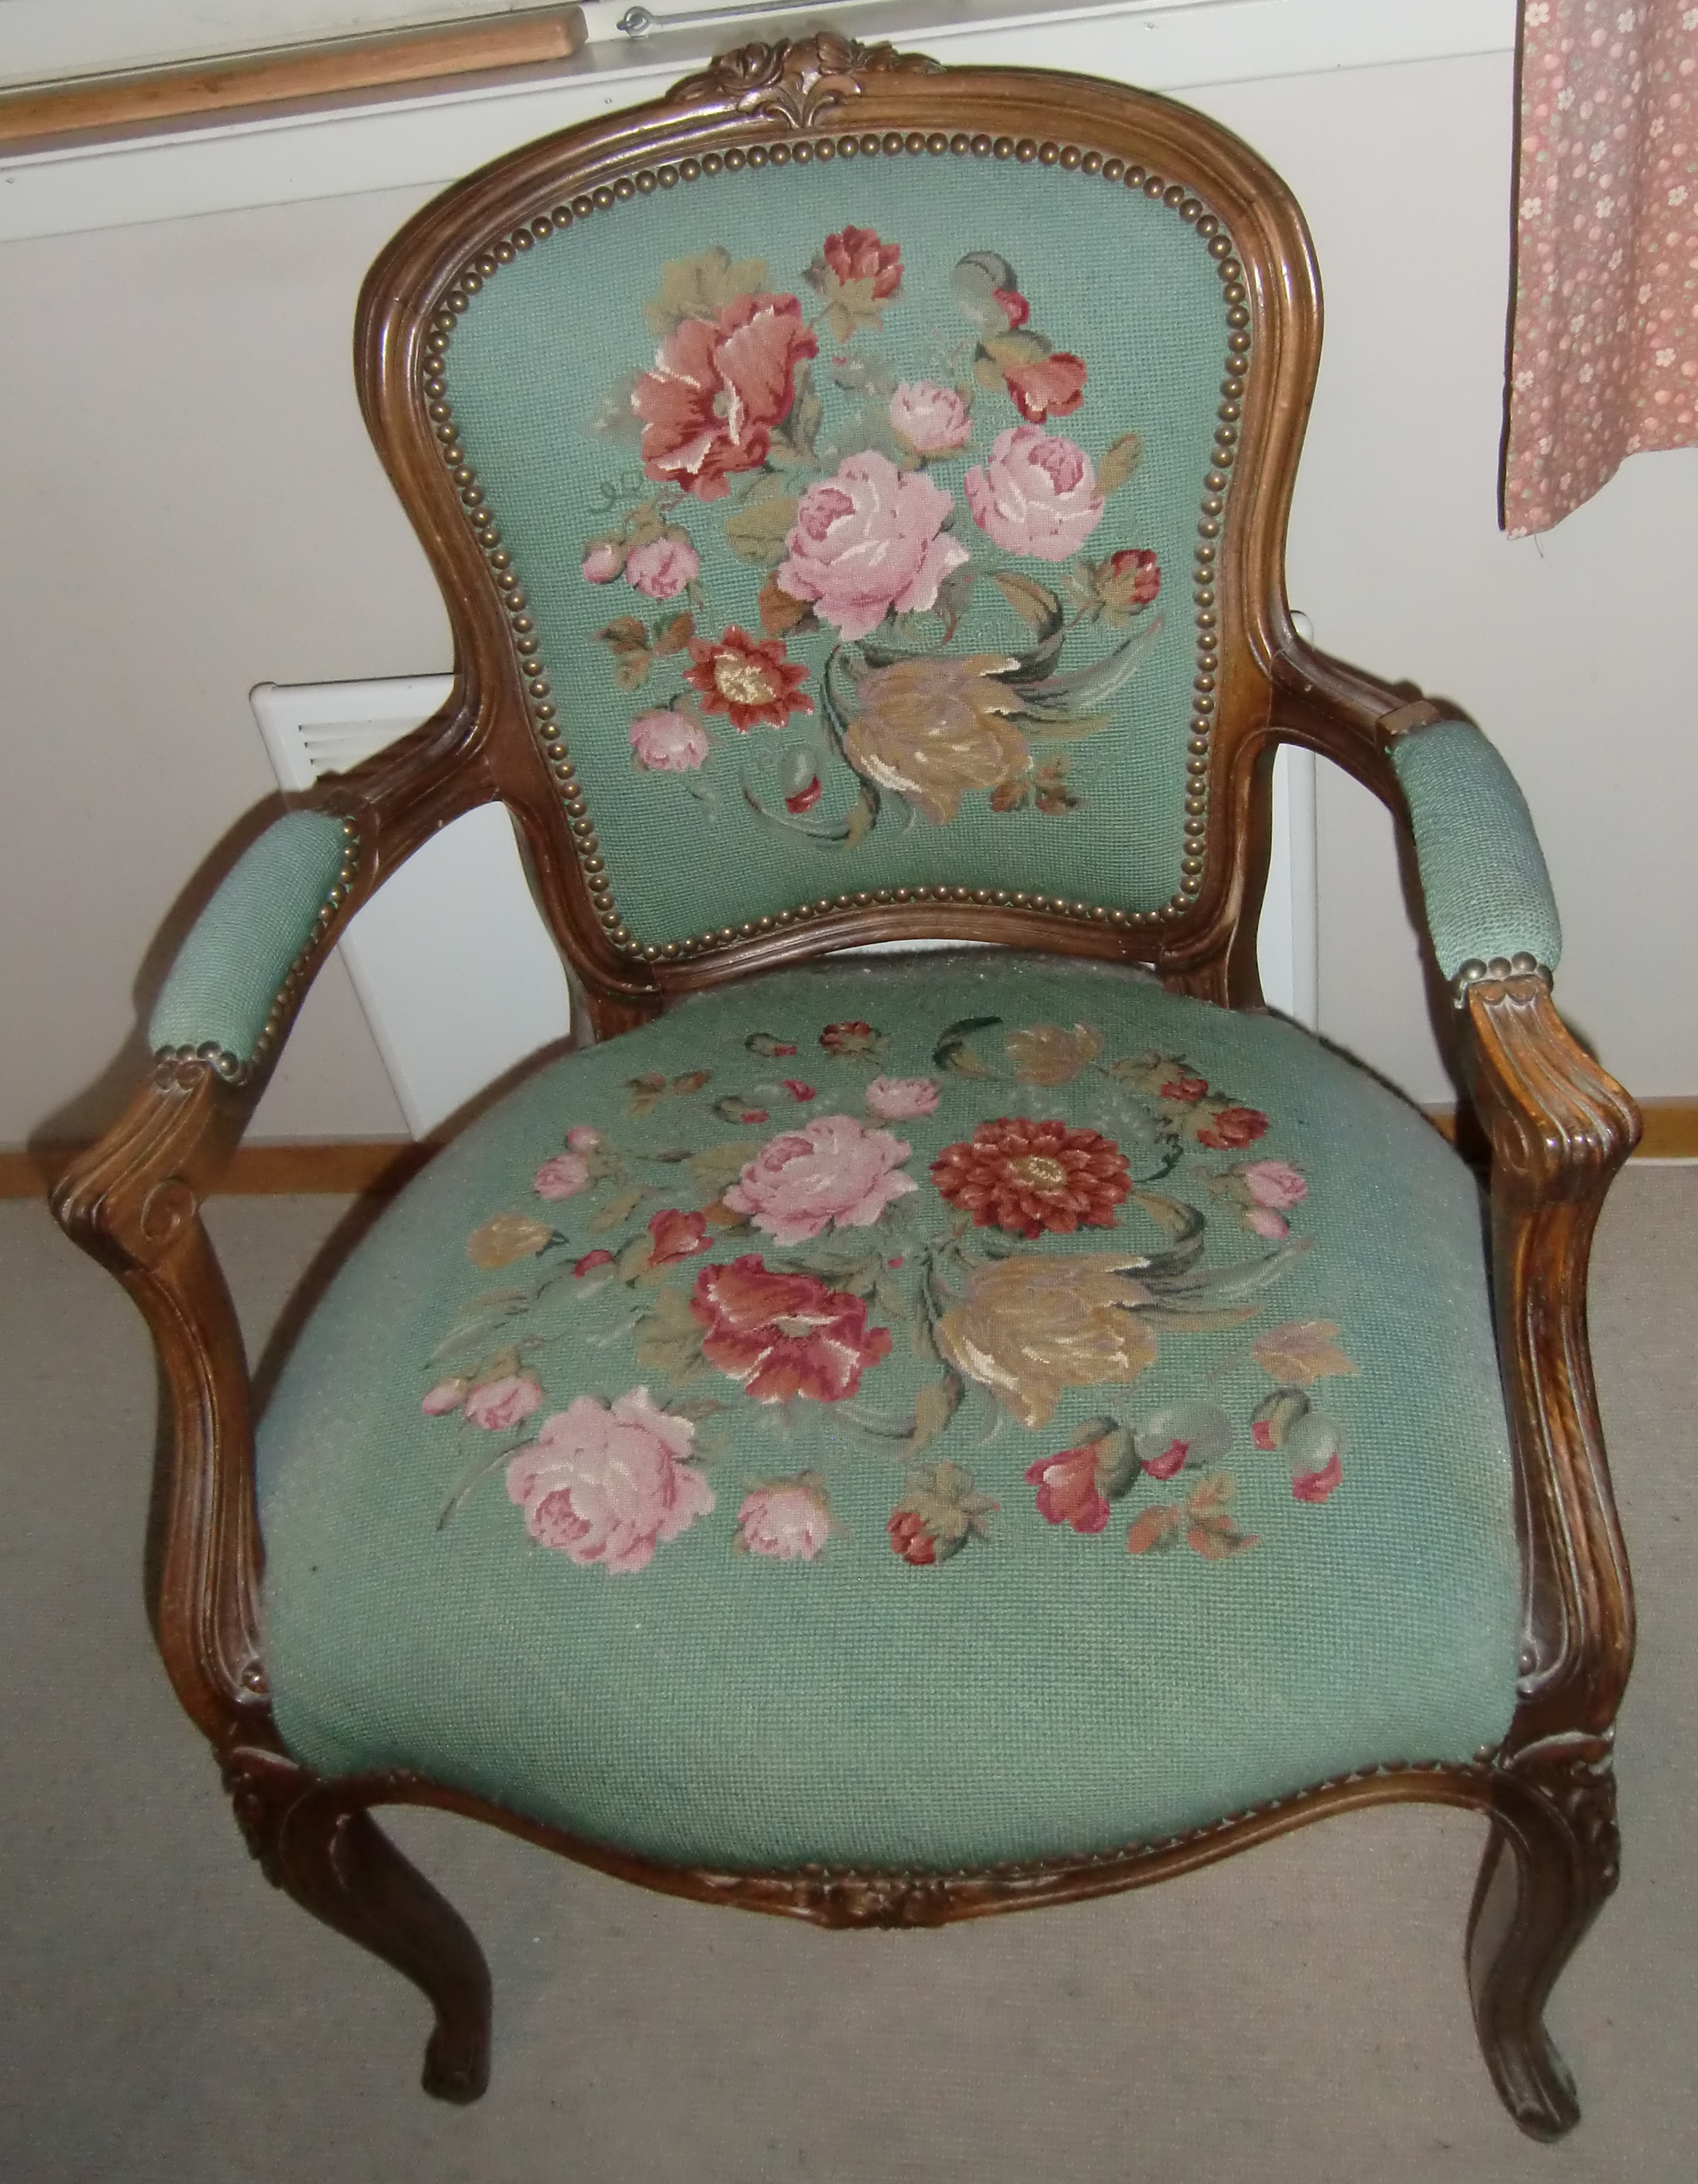 M889M Chair with petit point embroidery